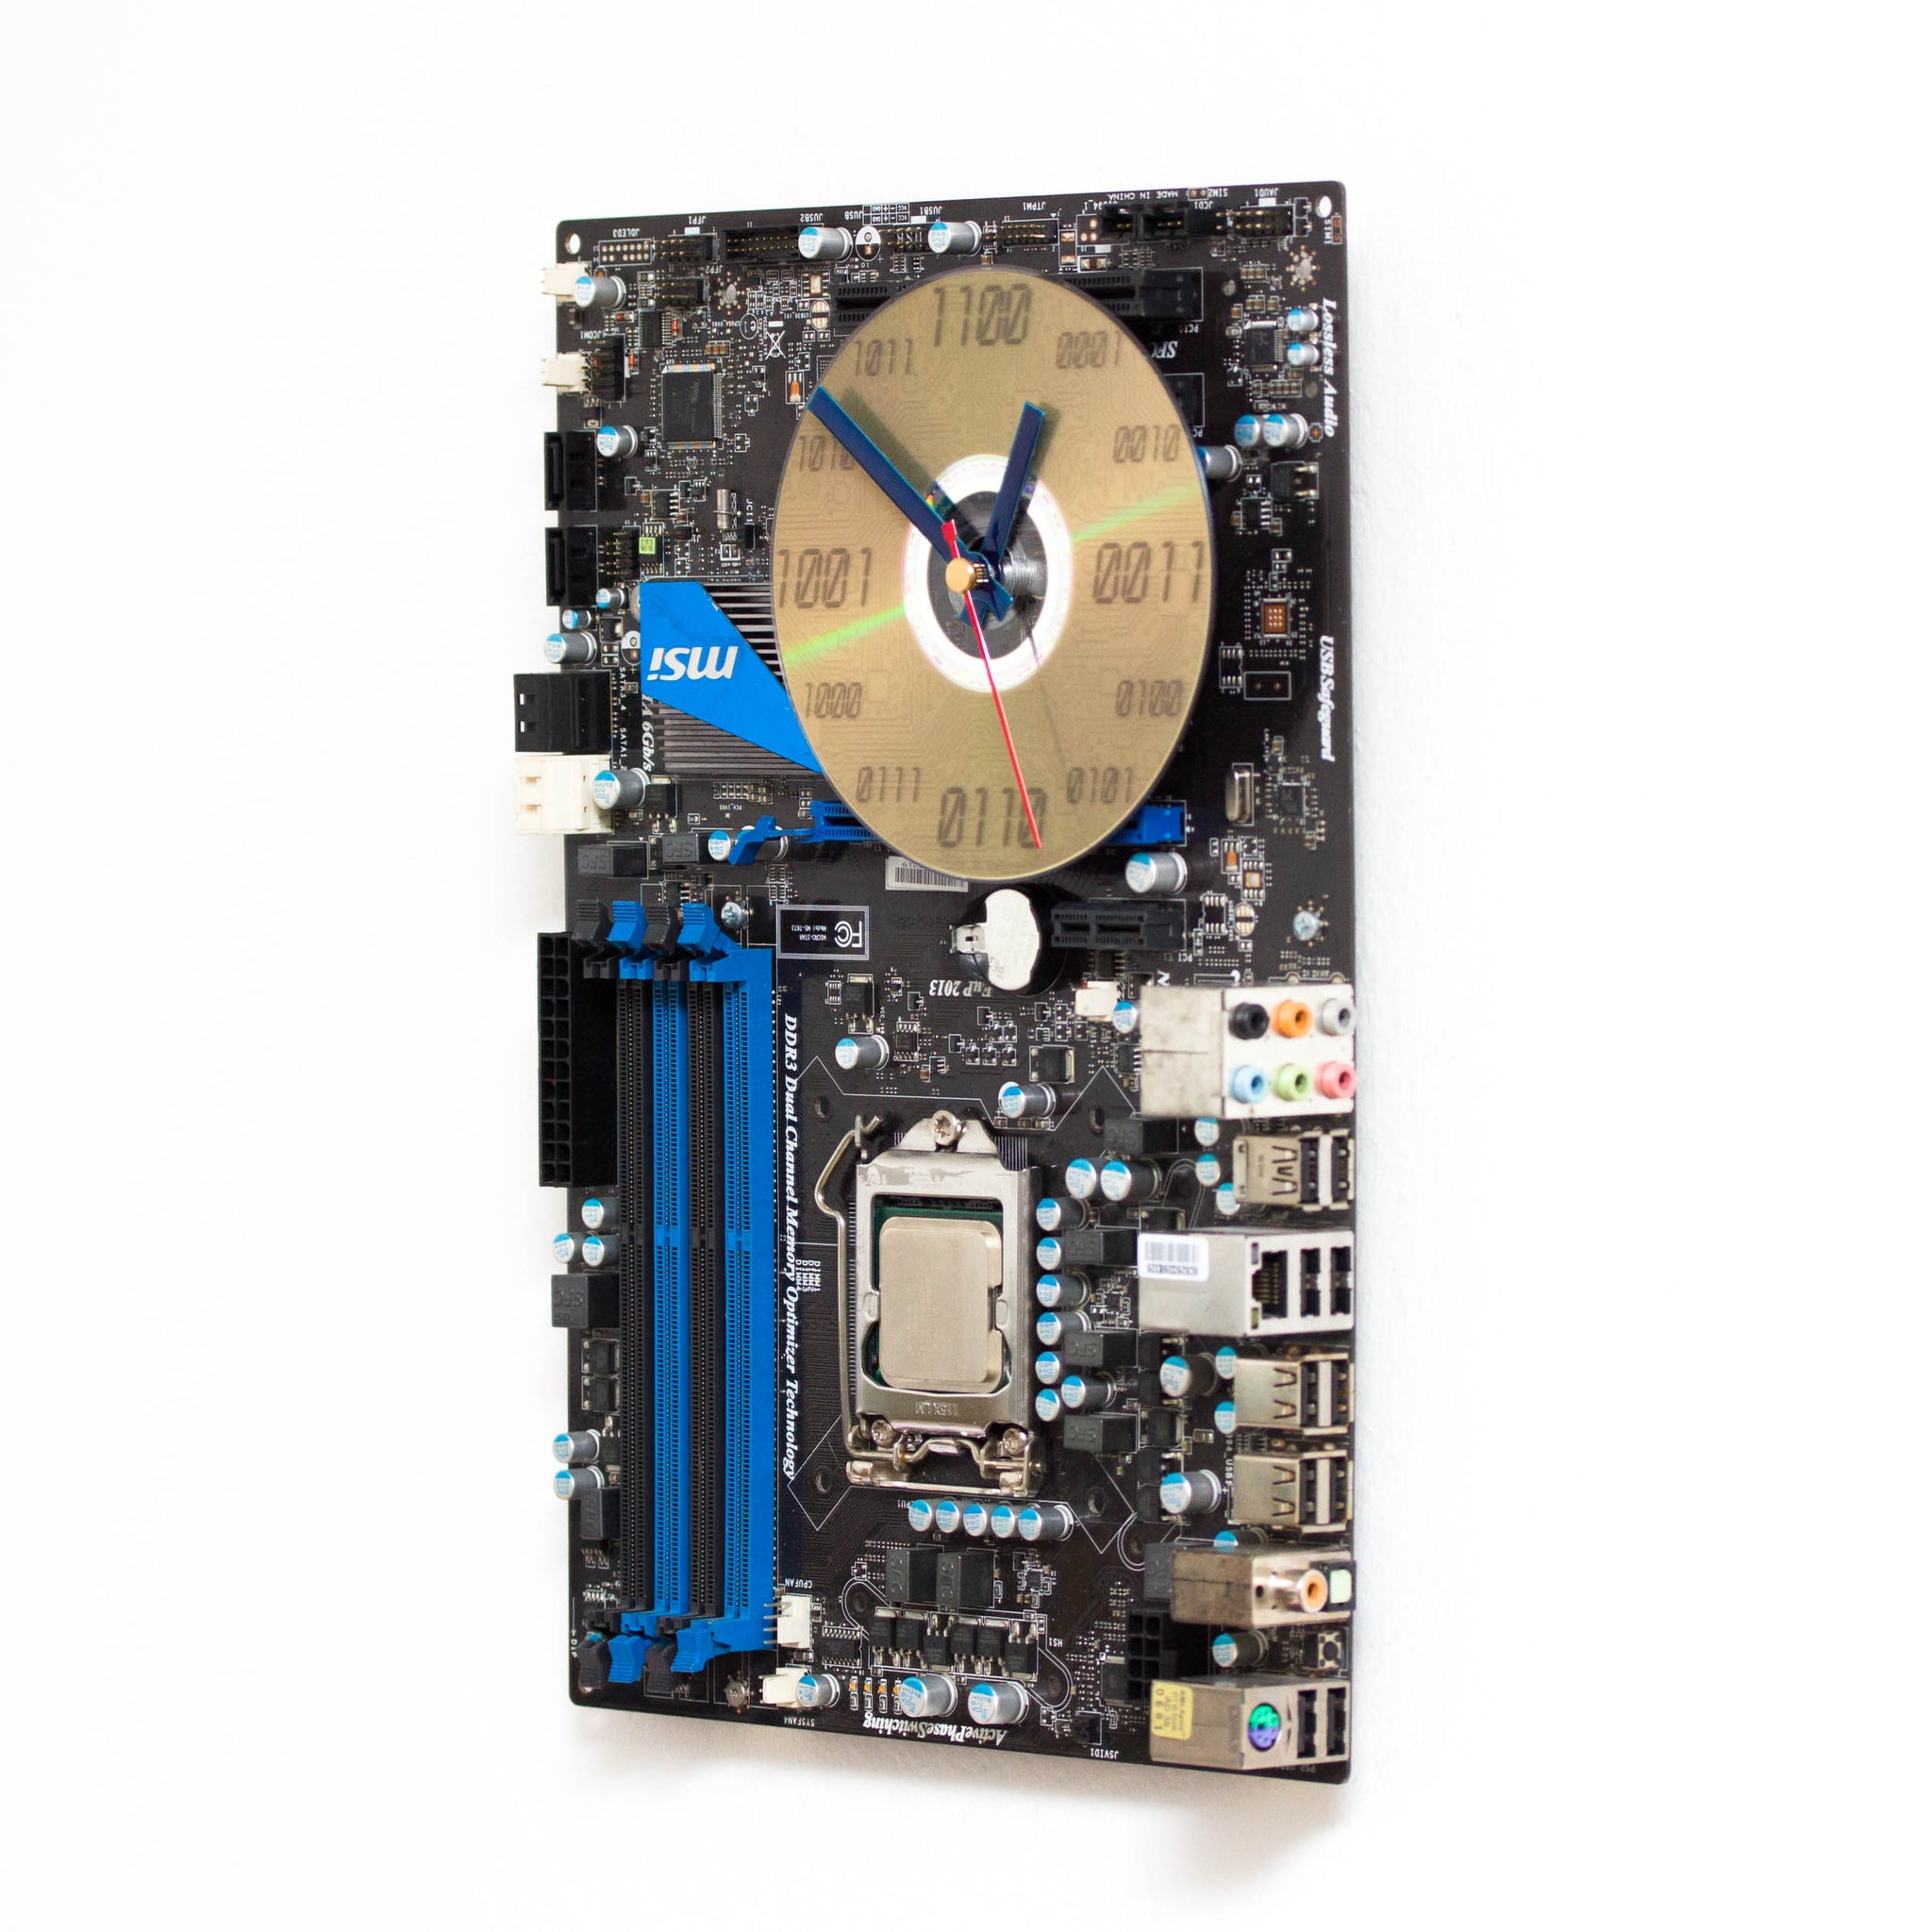 Wall clock made of dark brown circuit board with bright blue details